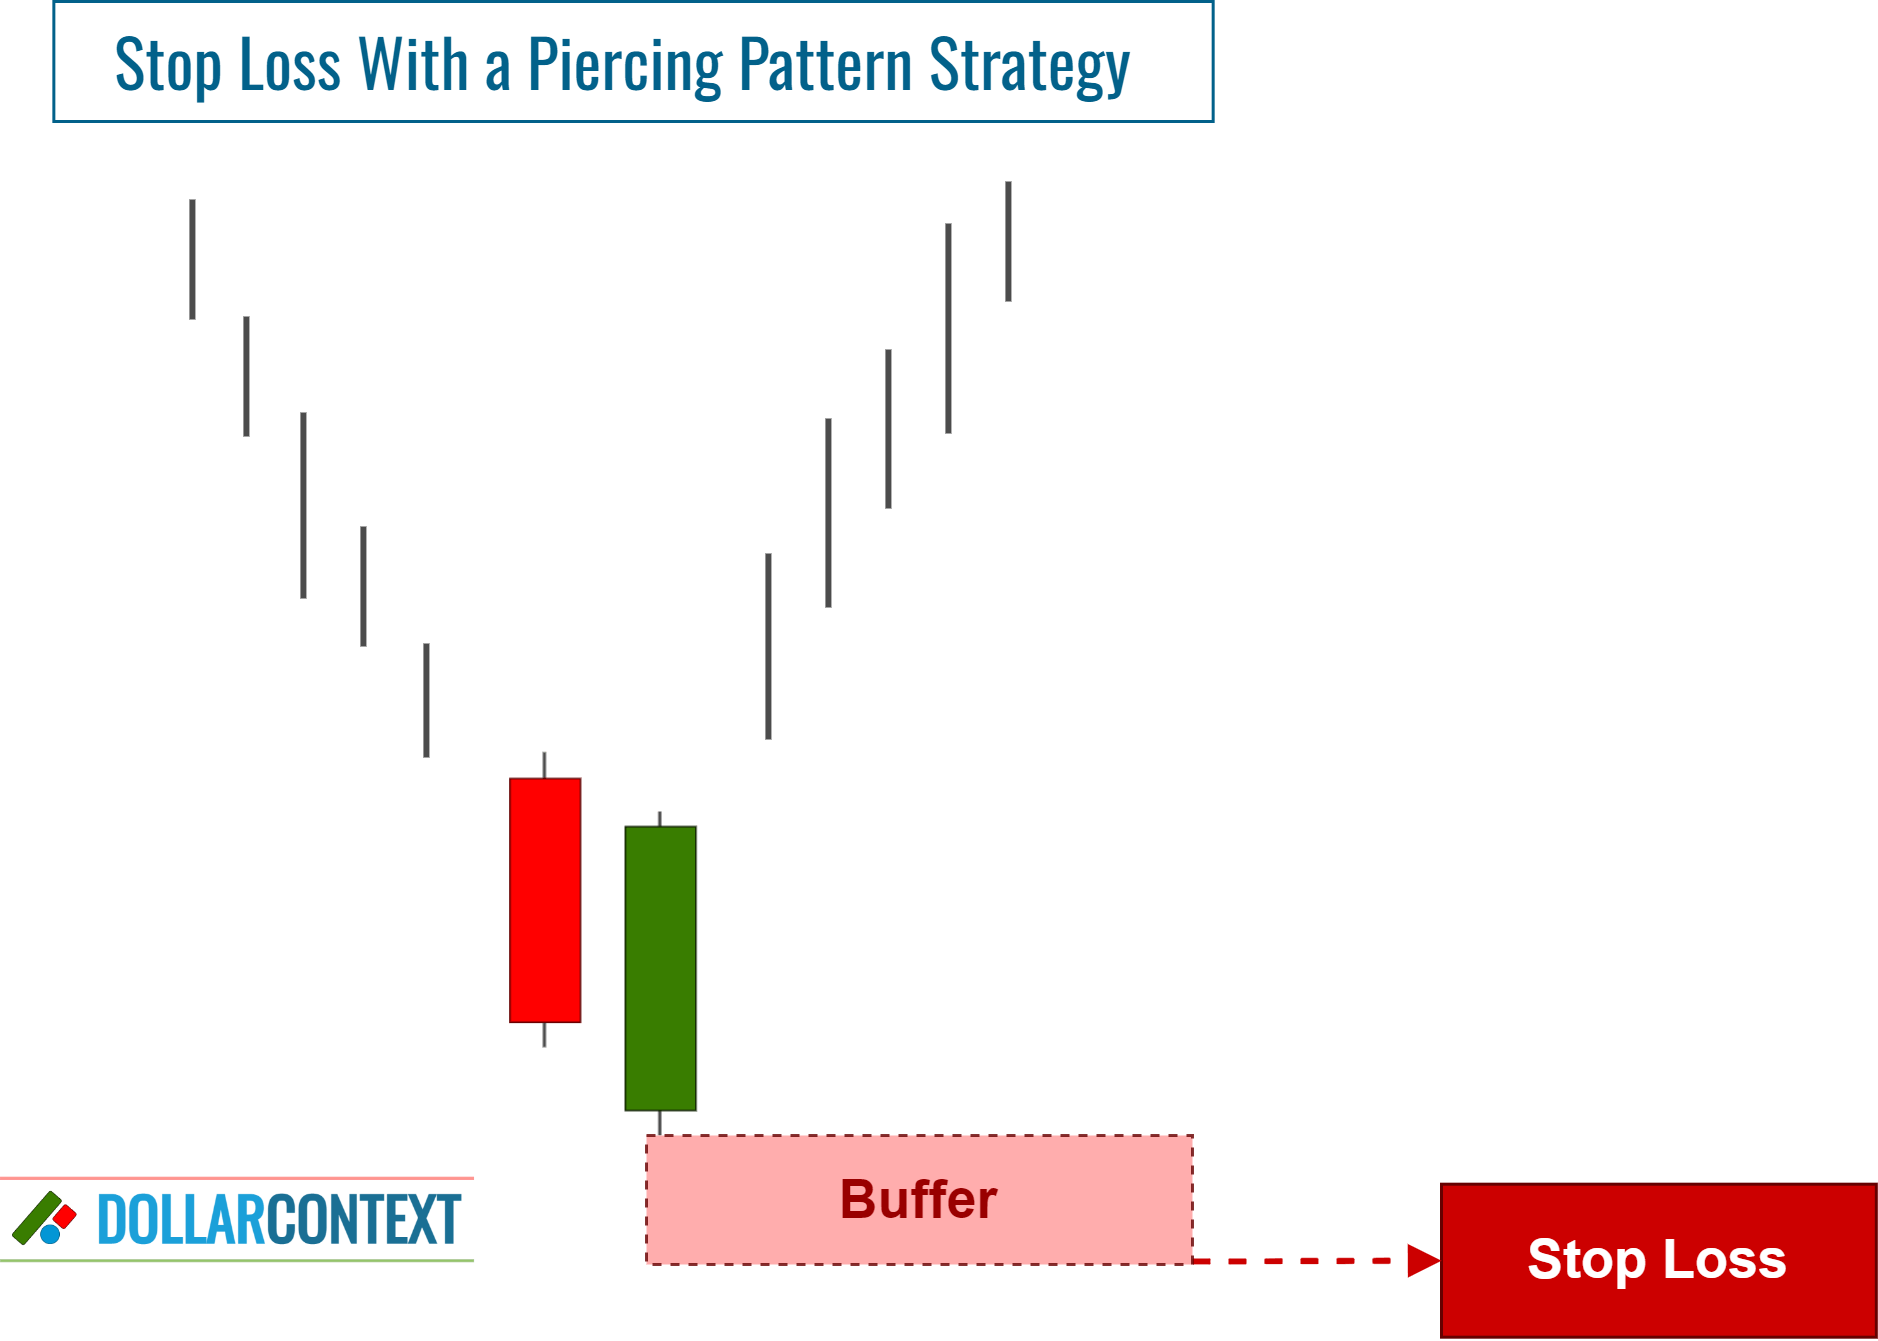 Piercing Pattern: Adding a Buffer to Your Stop-loss